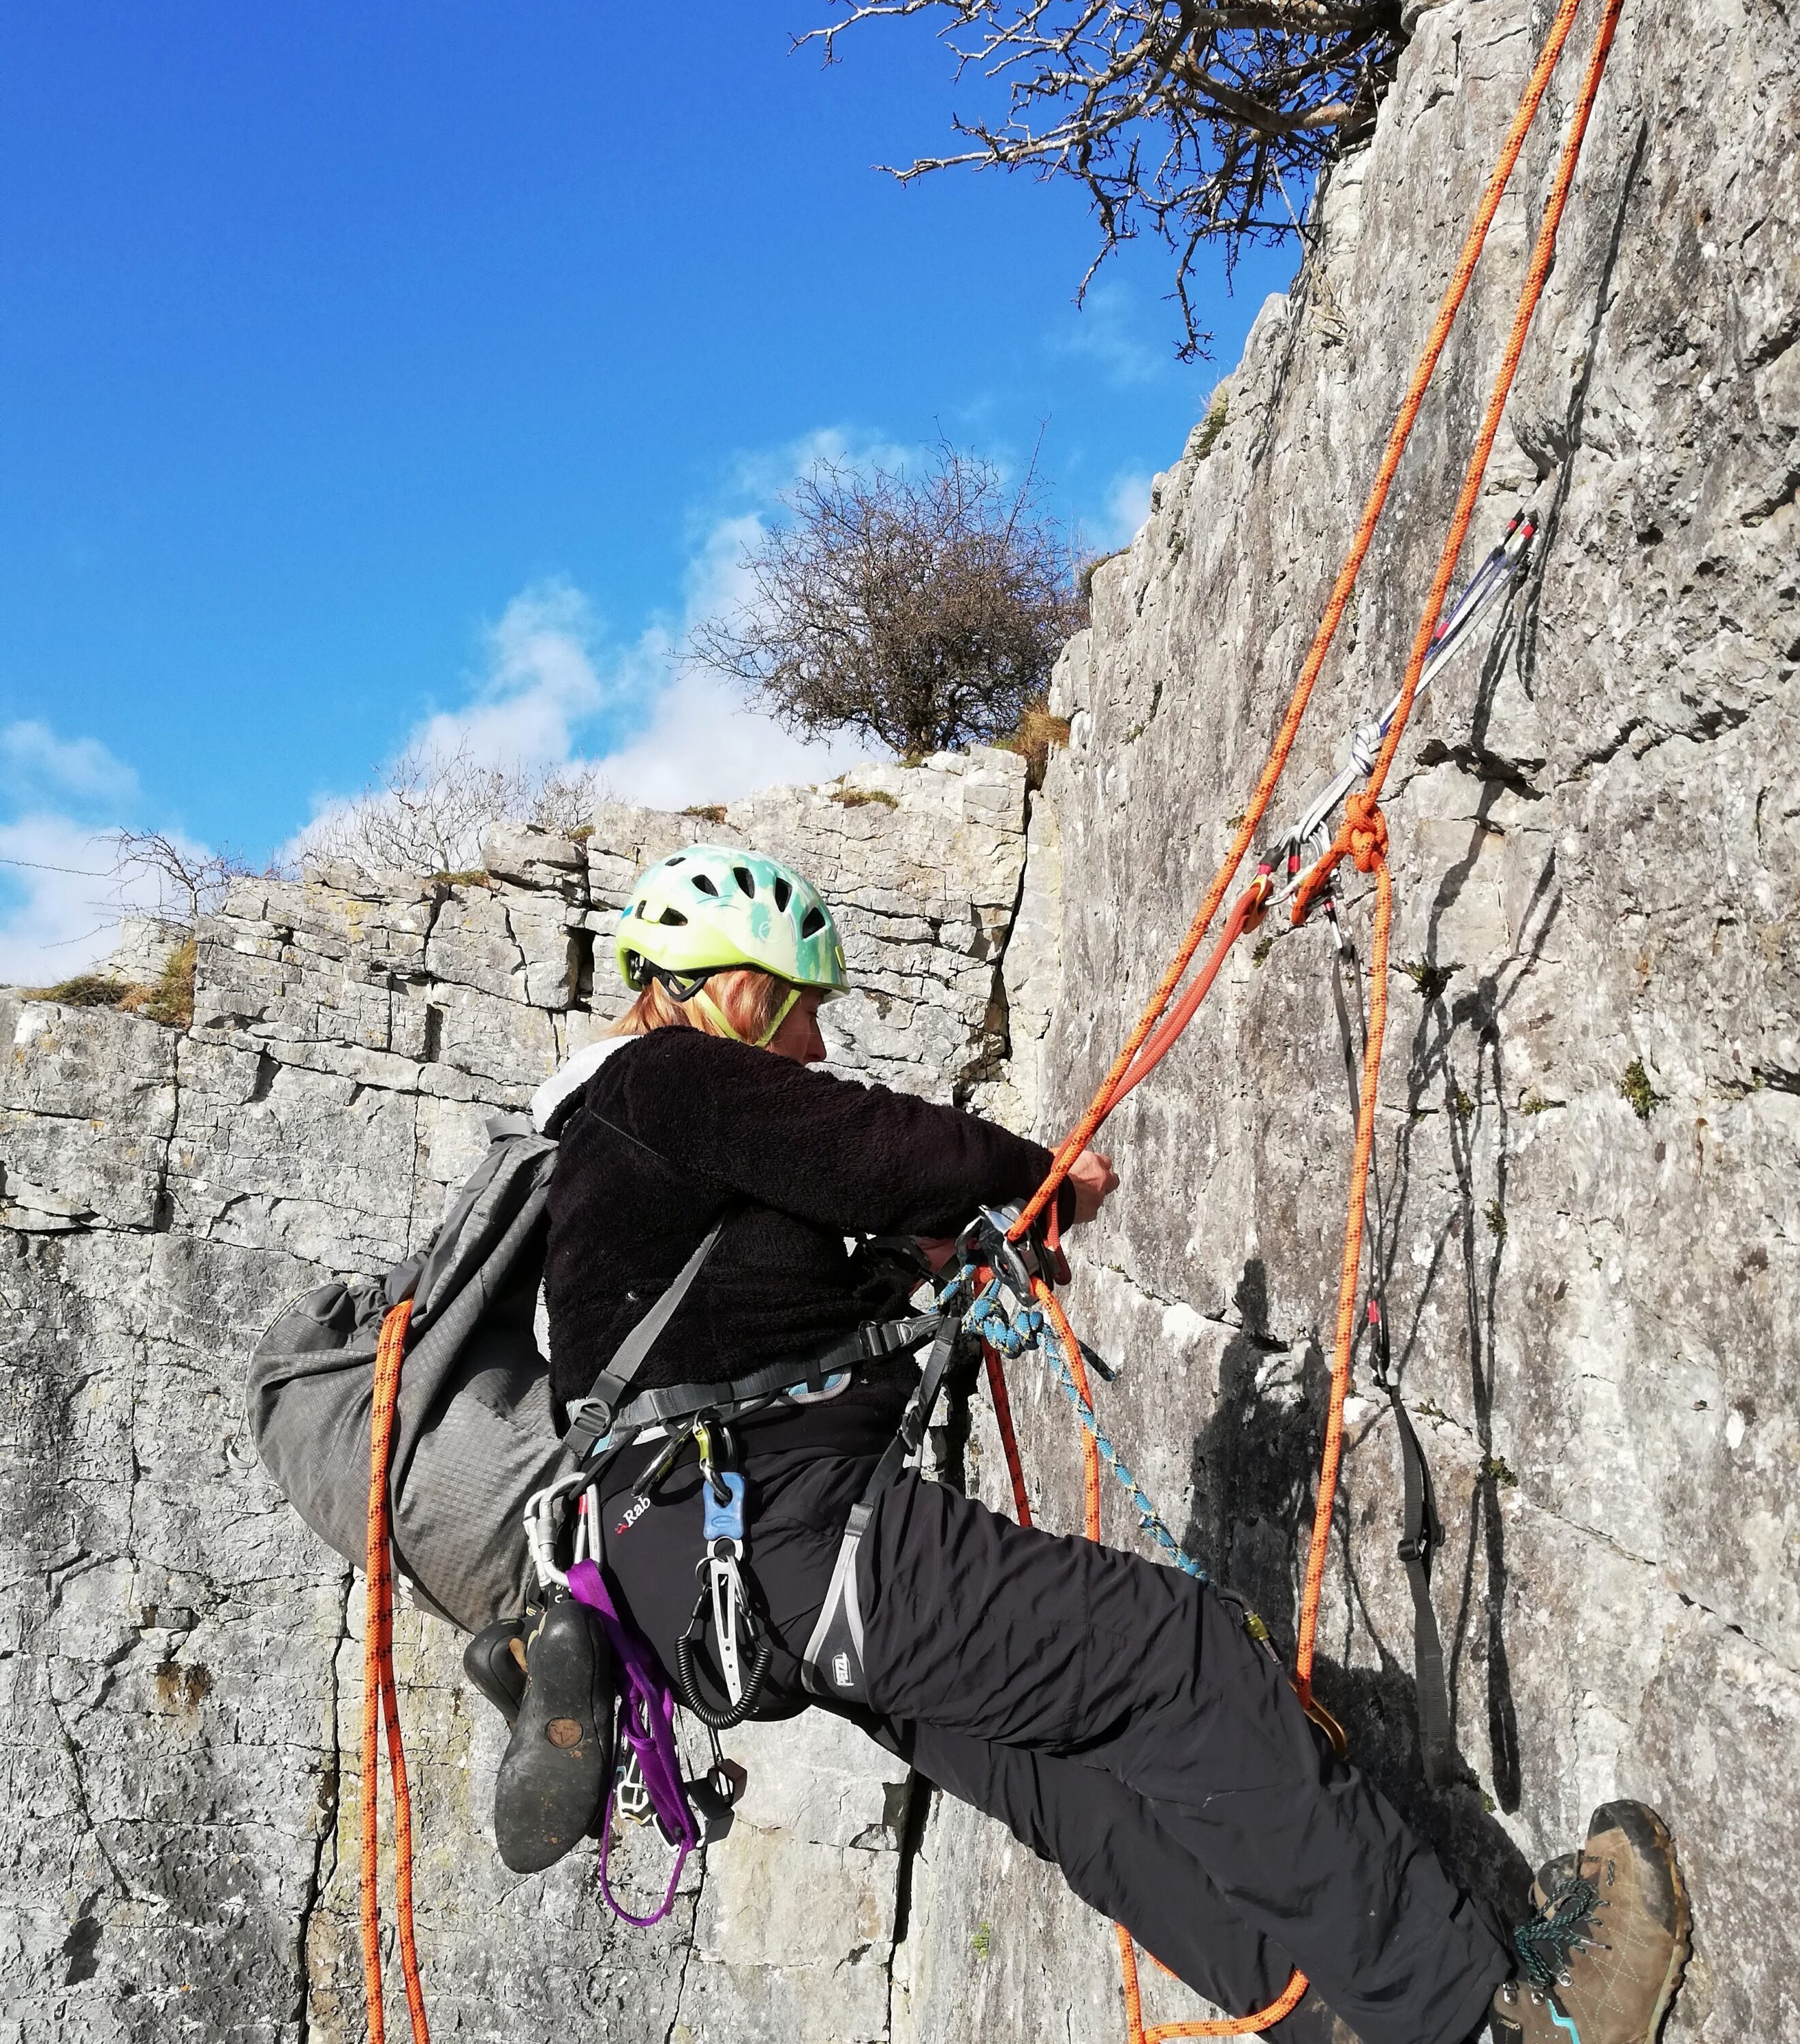 Top Rope Solo – DWG Mountaineering and Climbing Development Coach